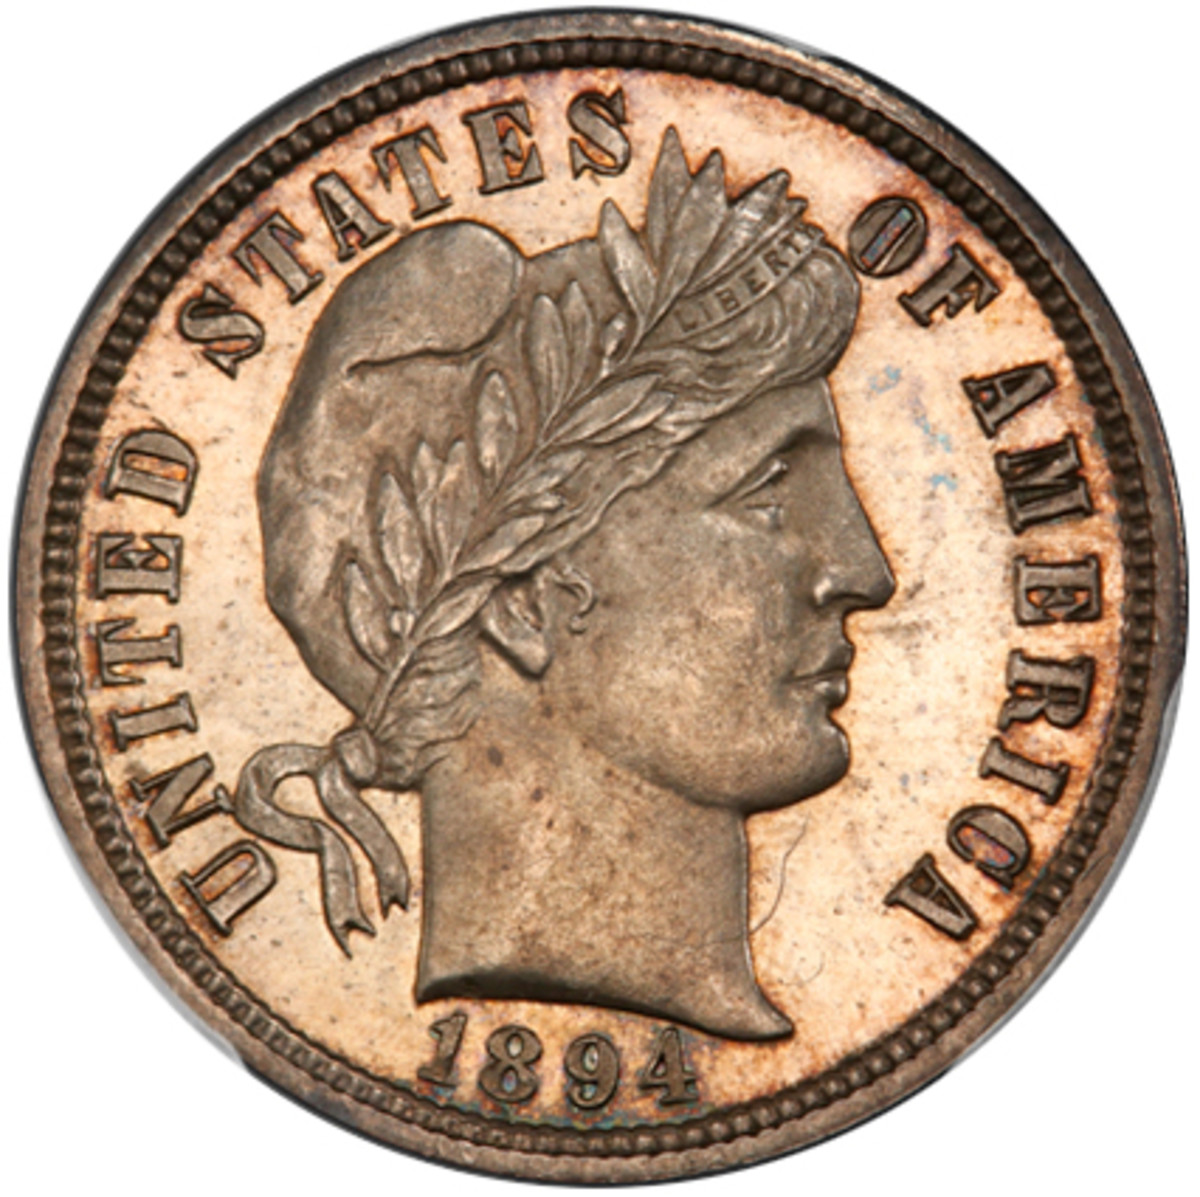 One of just nine known, this 1894-S dime from the Eliasberg Collection has great eye appeal.